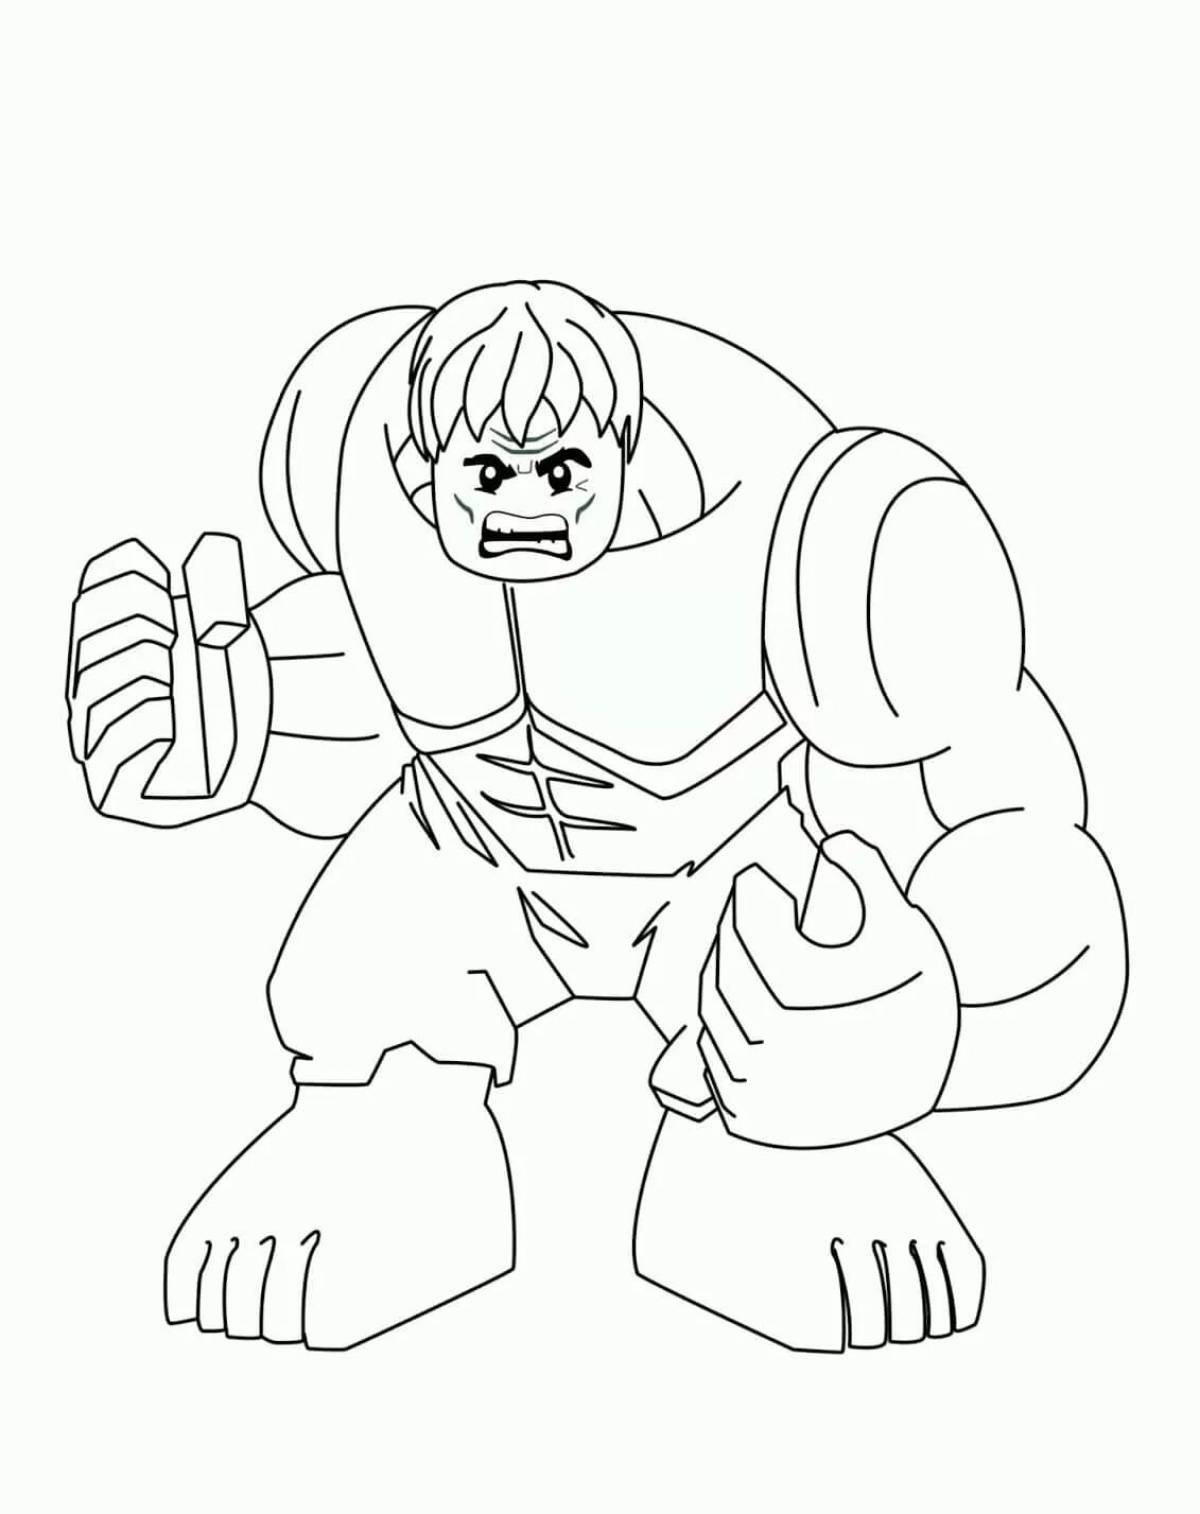 Amazing gujutsu character coloring pages for kids